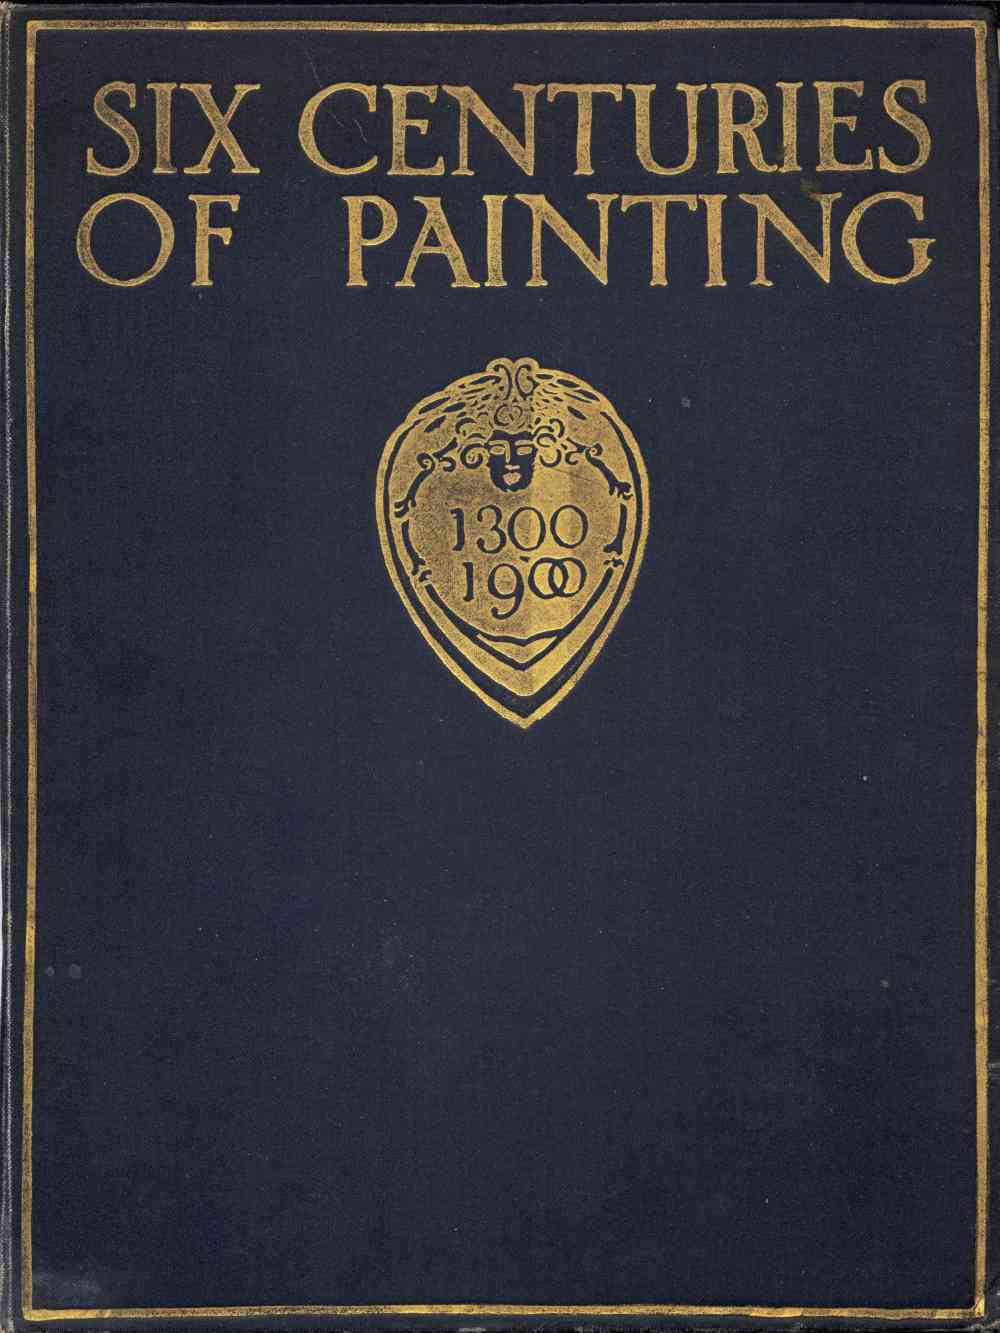 The Project Gutenberg eBook of Six Centuries Of Painting, by Randall Davies.